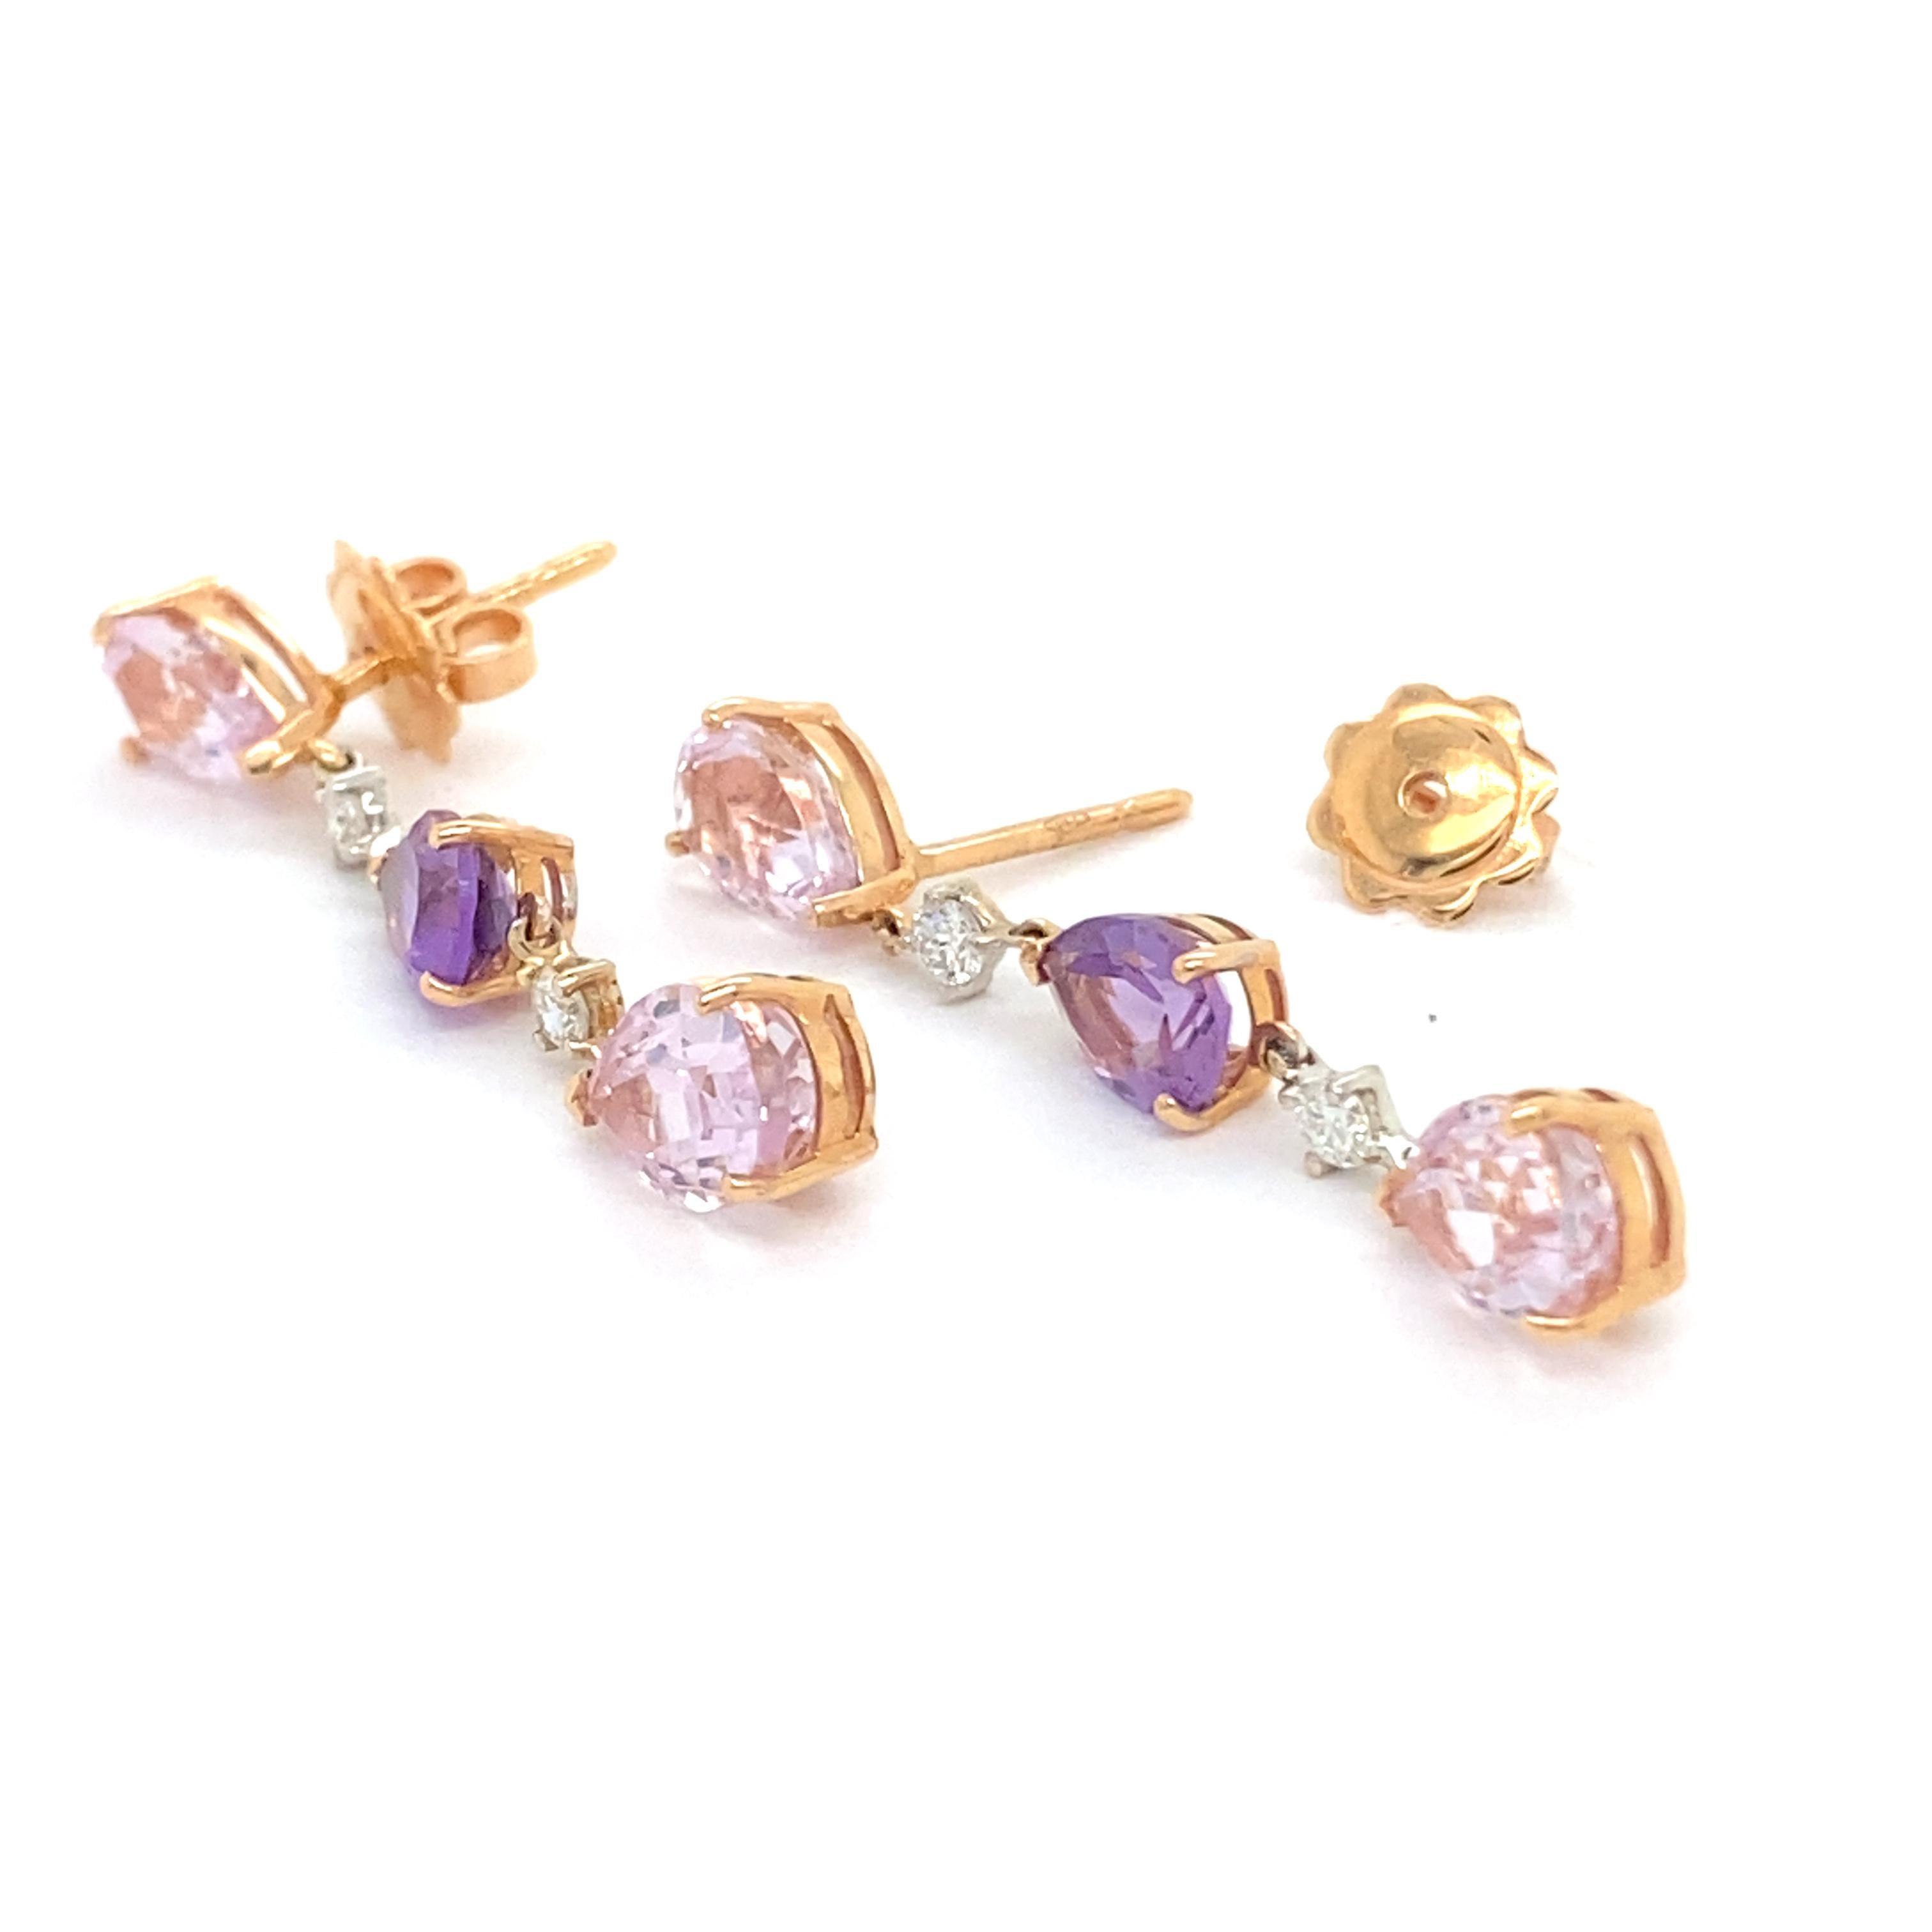 Check out these stunning French drop earrings from our collection by Mesure et Art du Temps, showcasing diamonds, amethysts and kunzites.

Each earring is adorned with 4 brilliant cut F/G diamonds with a total weight of 0.21 carat. These premium